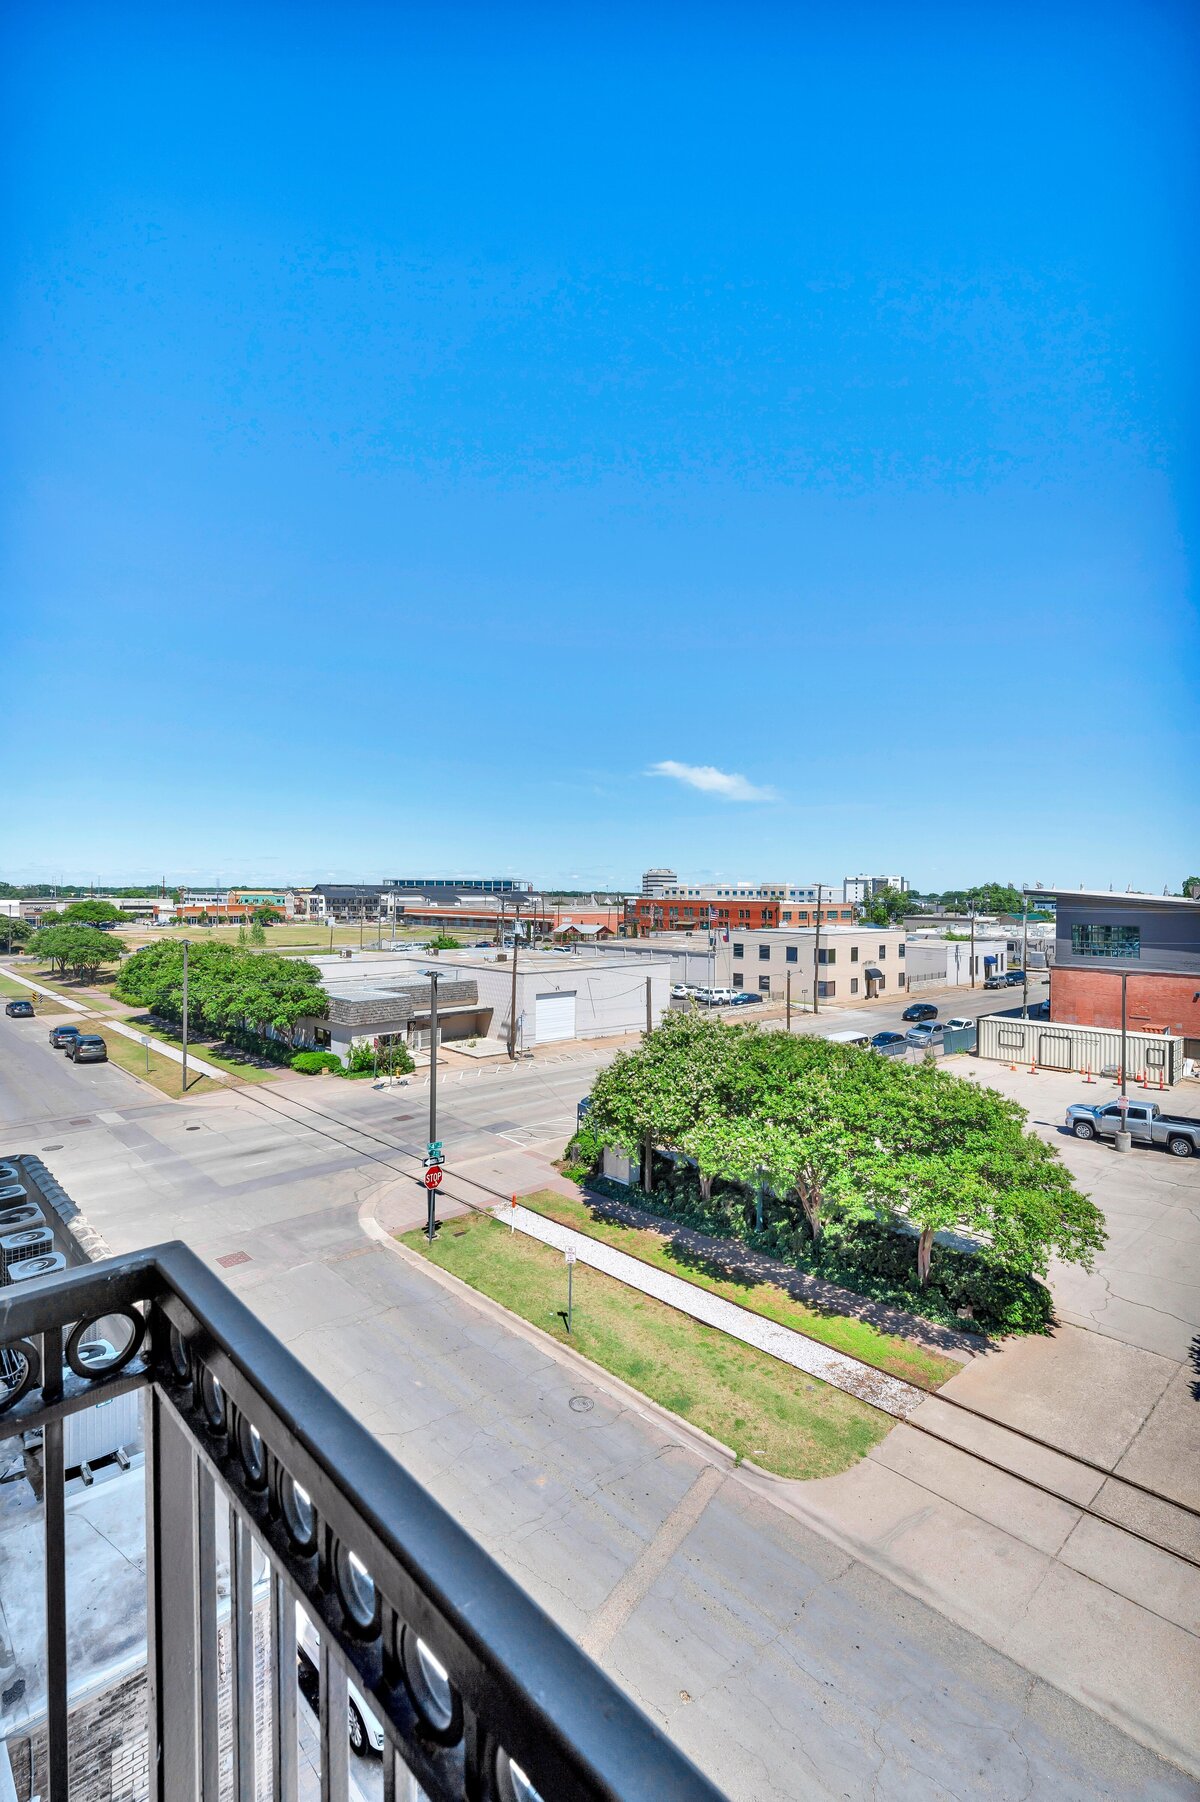 Third floor view from the balcony of this one-bedroom, one-bathroom vintage condo that sleeps 4 in the historic Behrens building in the heart of the Magnolia Silo District in downtown Waco, TX.